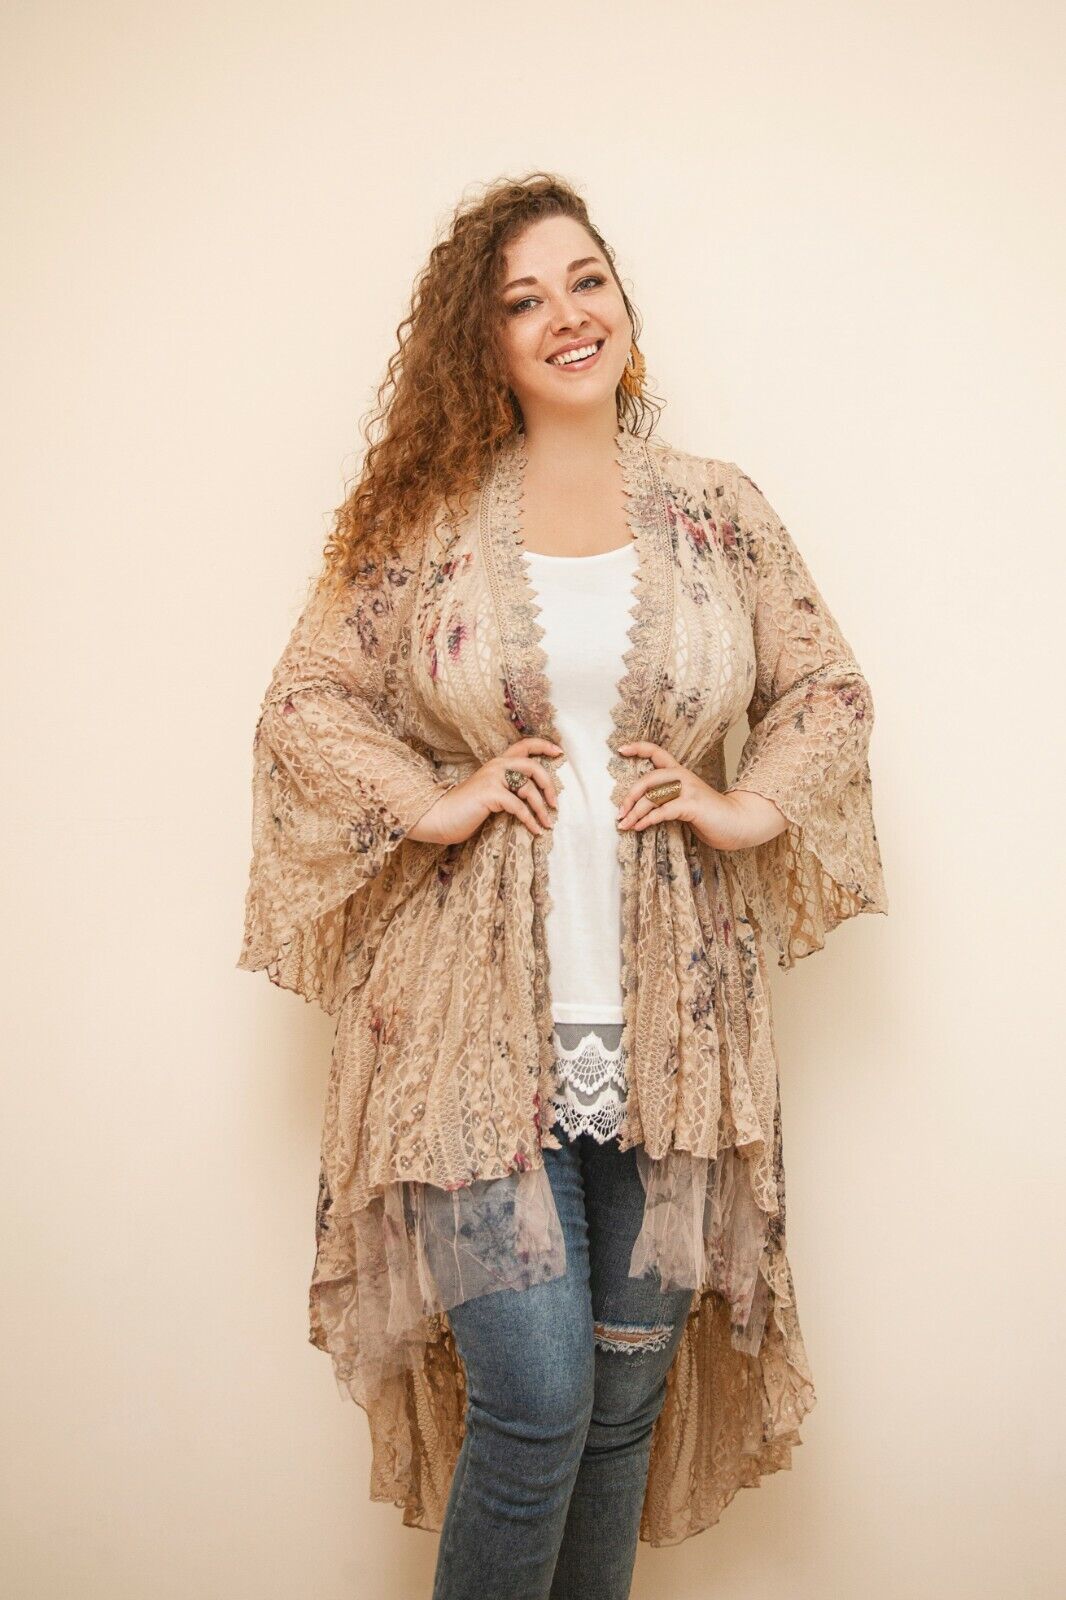 Kirkegård Pearly at fortsætte Bright Day - Bohemian Embroidered Floral Lace Duster - - Yippie Vibe